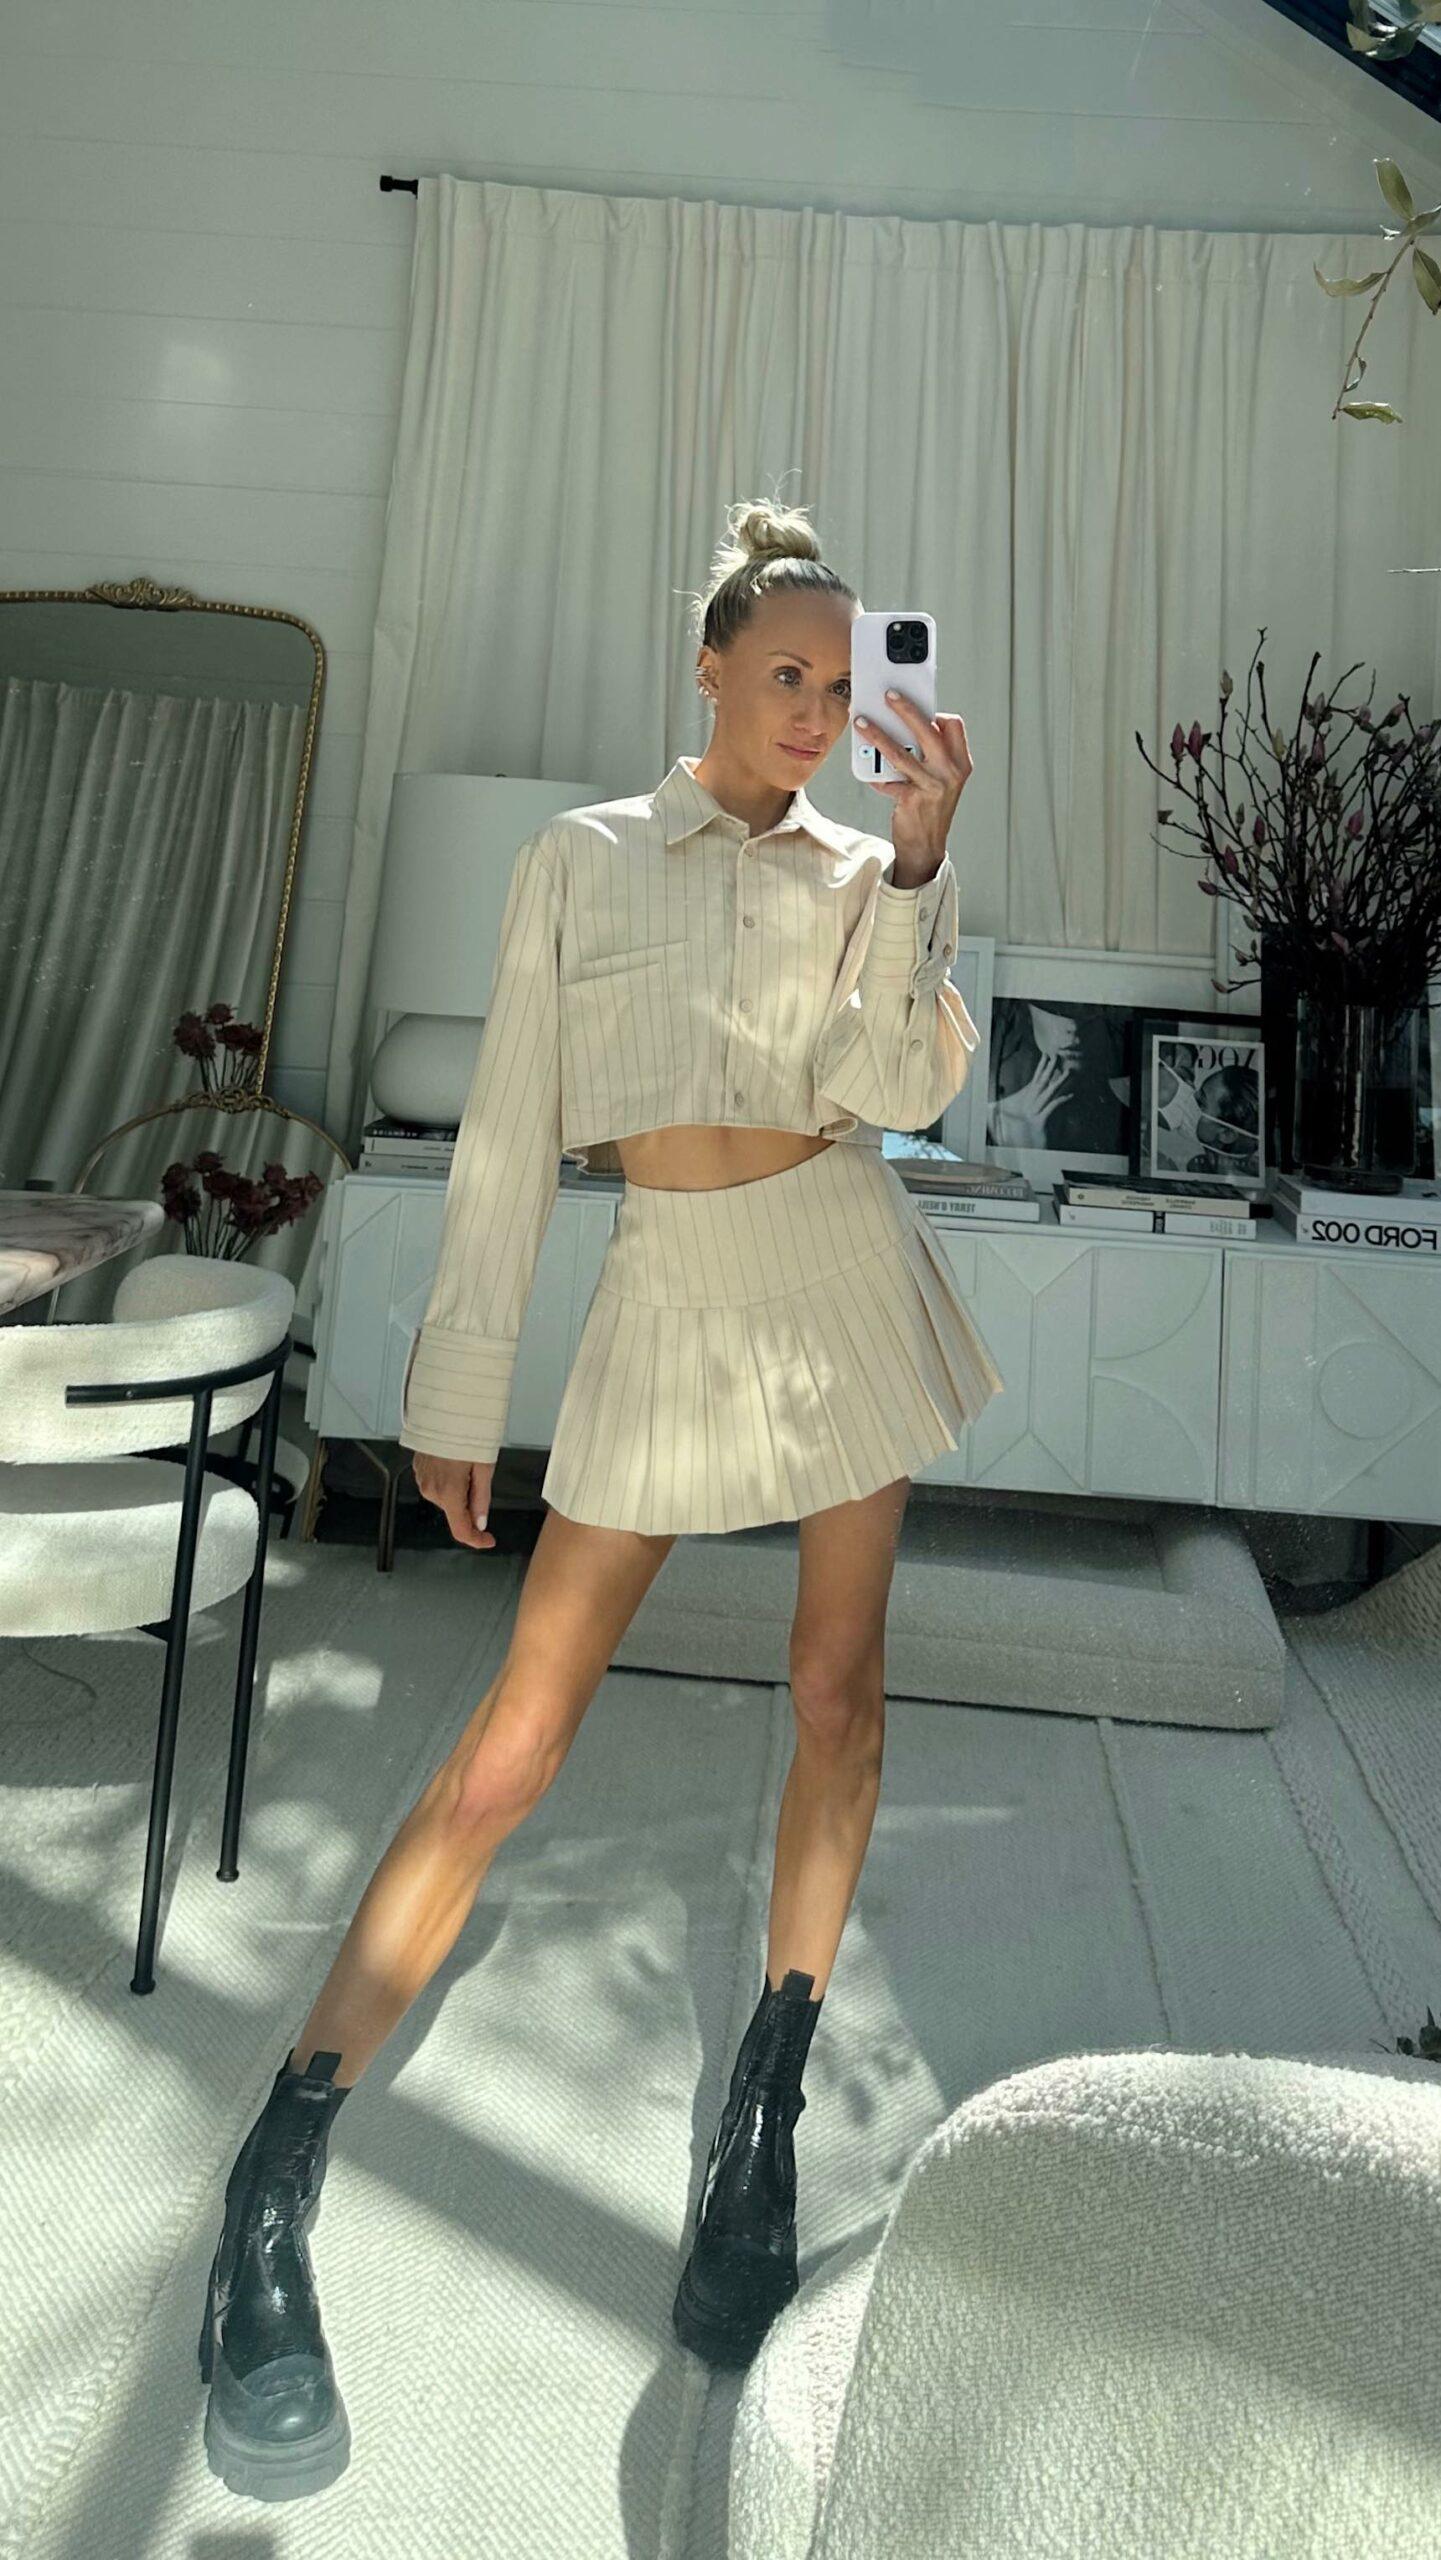 Nastia Liukin shares a get ready with me (GRWM) video in a tan skort and jacket